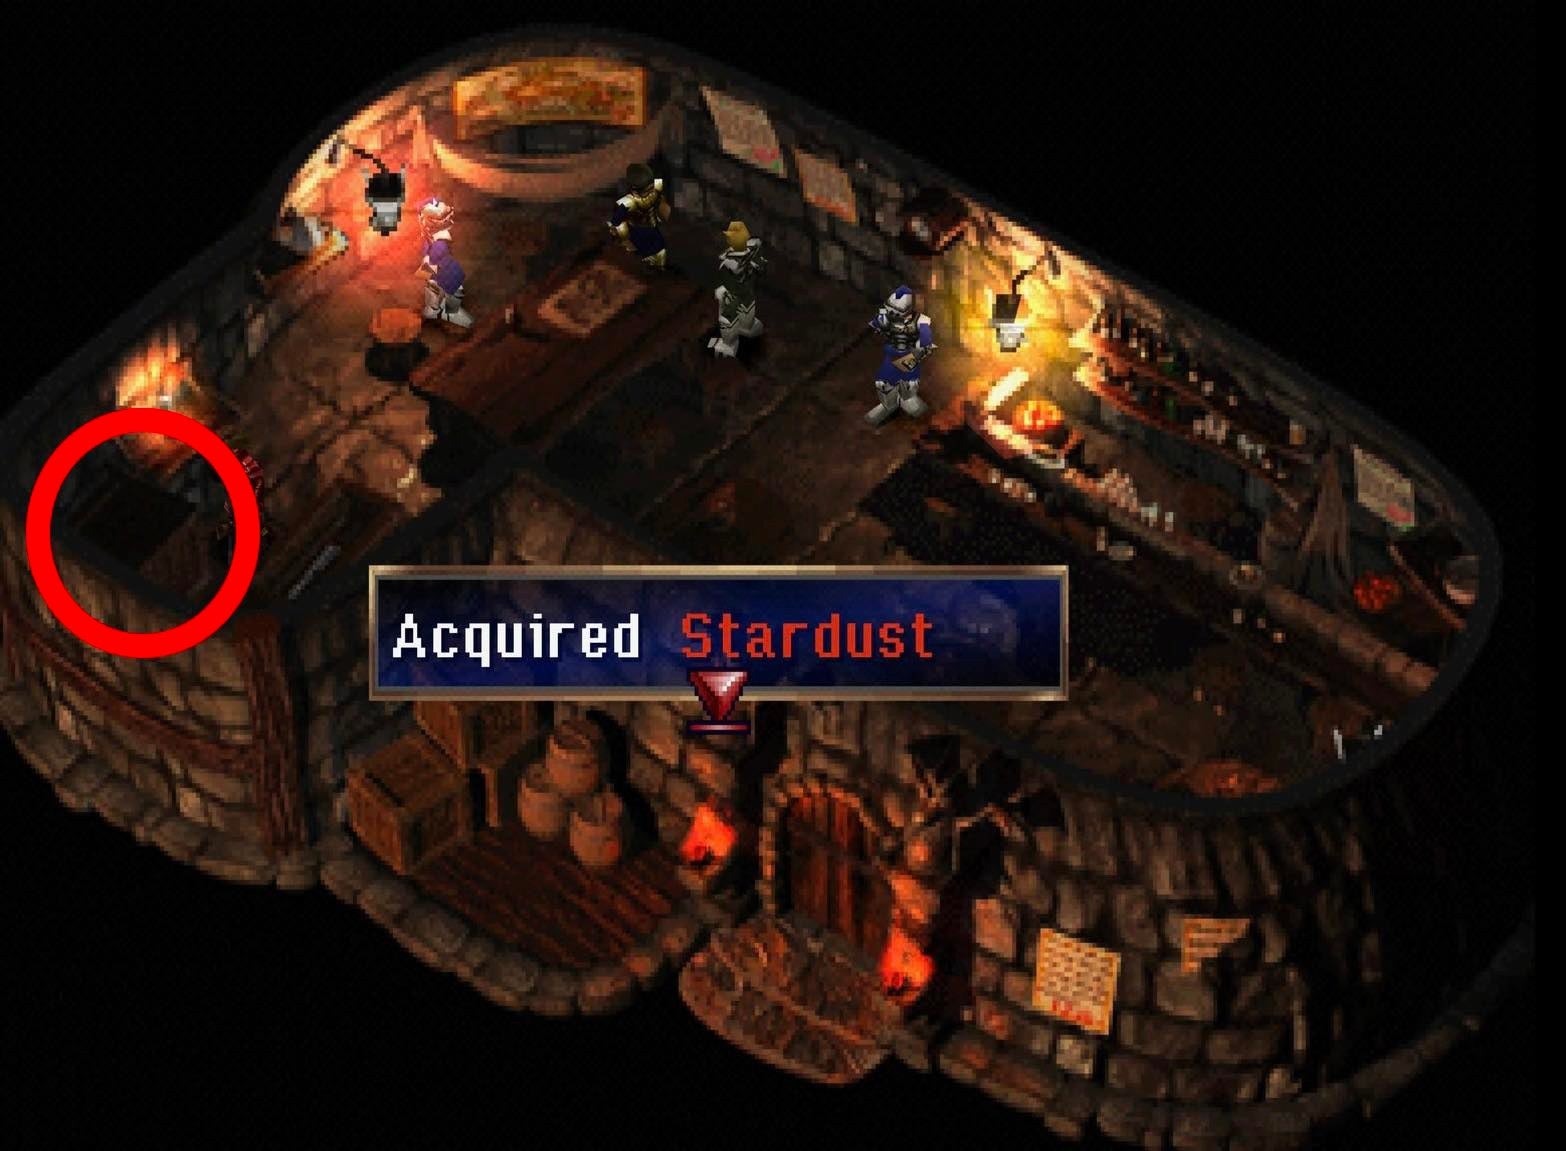 First Stardust location in Hoax.